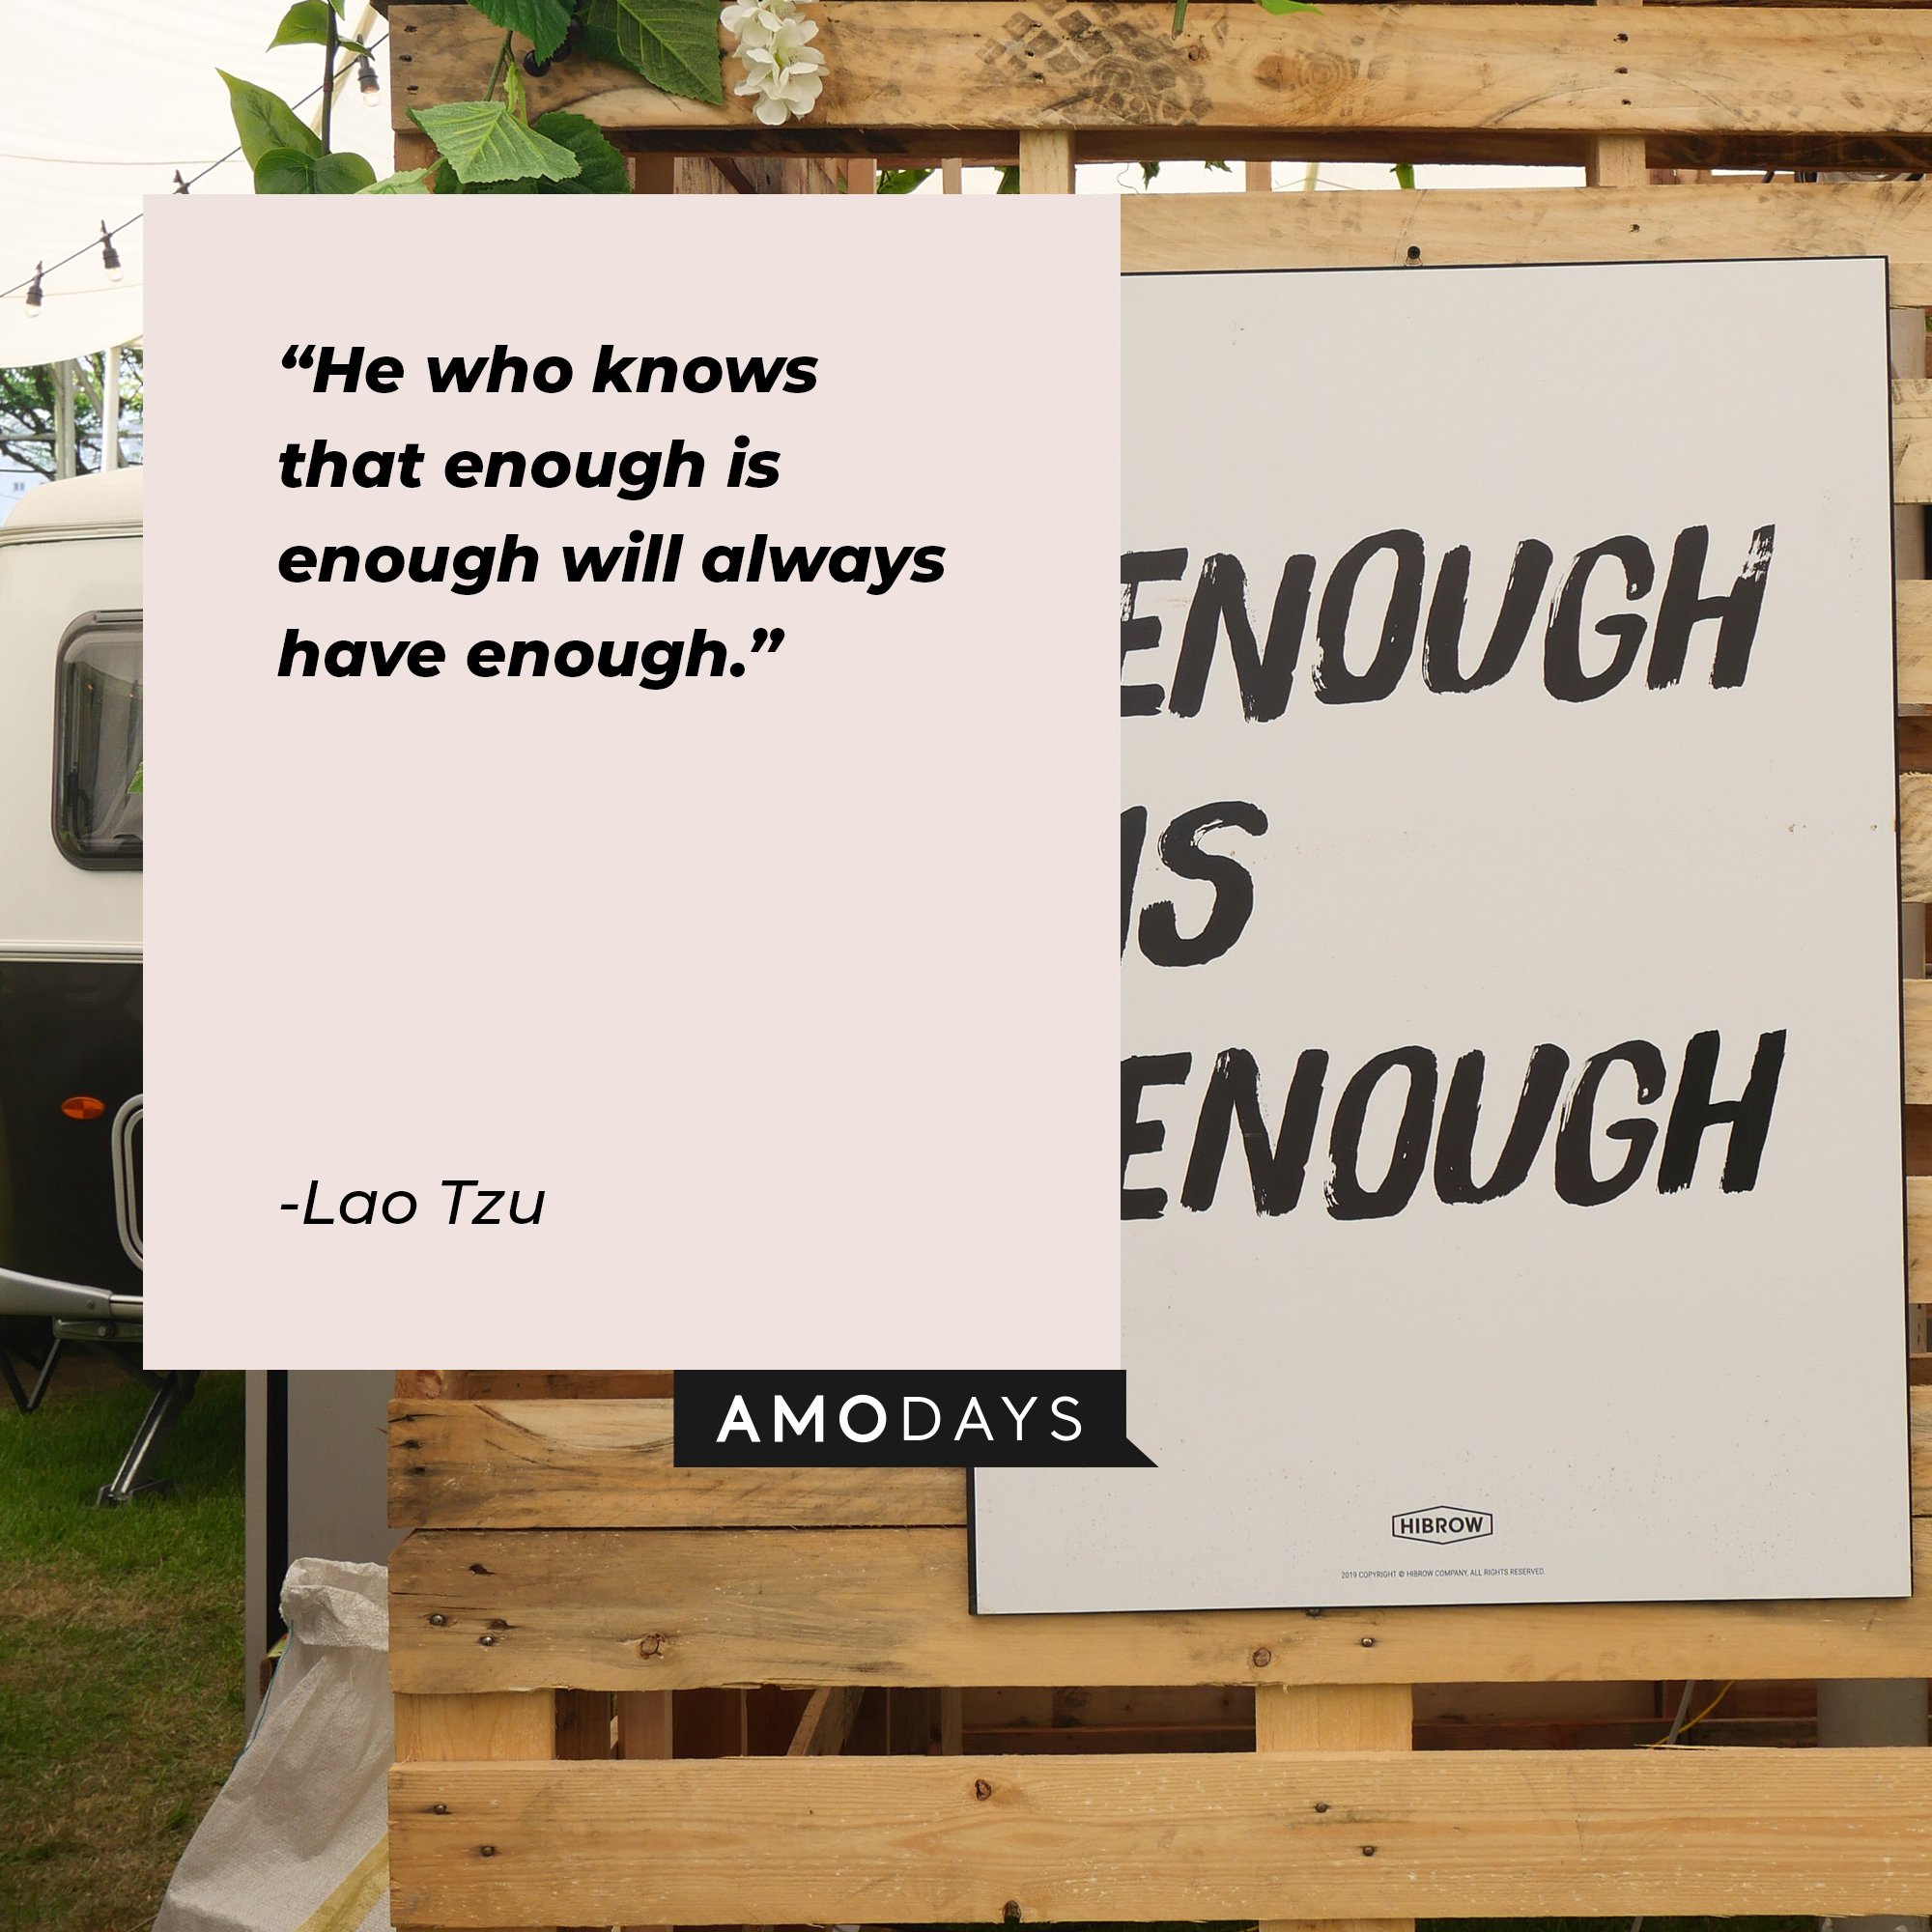 Lao Tzu’s quote: “He who knows that enough is enough will always have enough.” | Image: AmoDays 